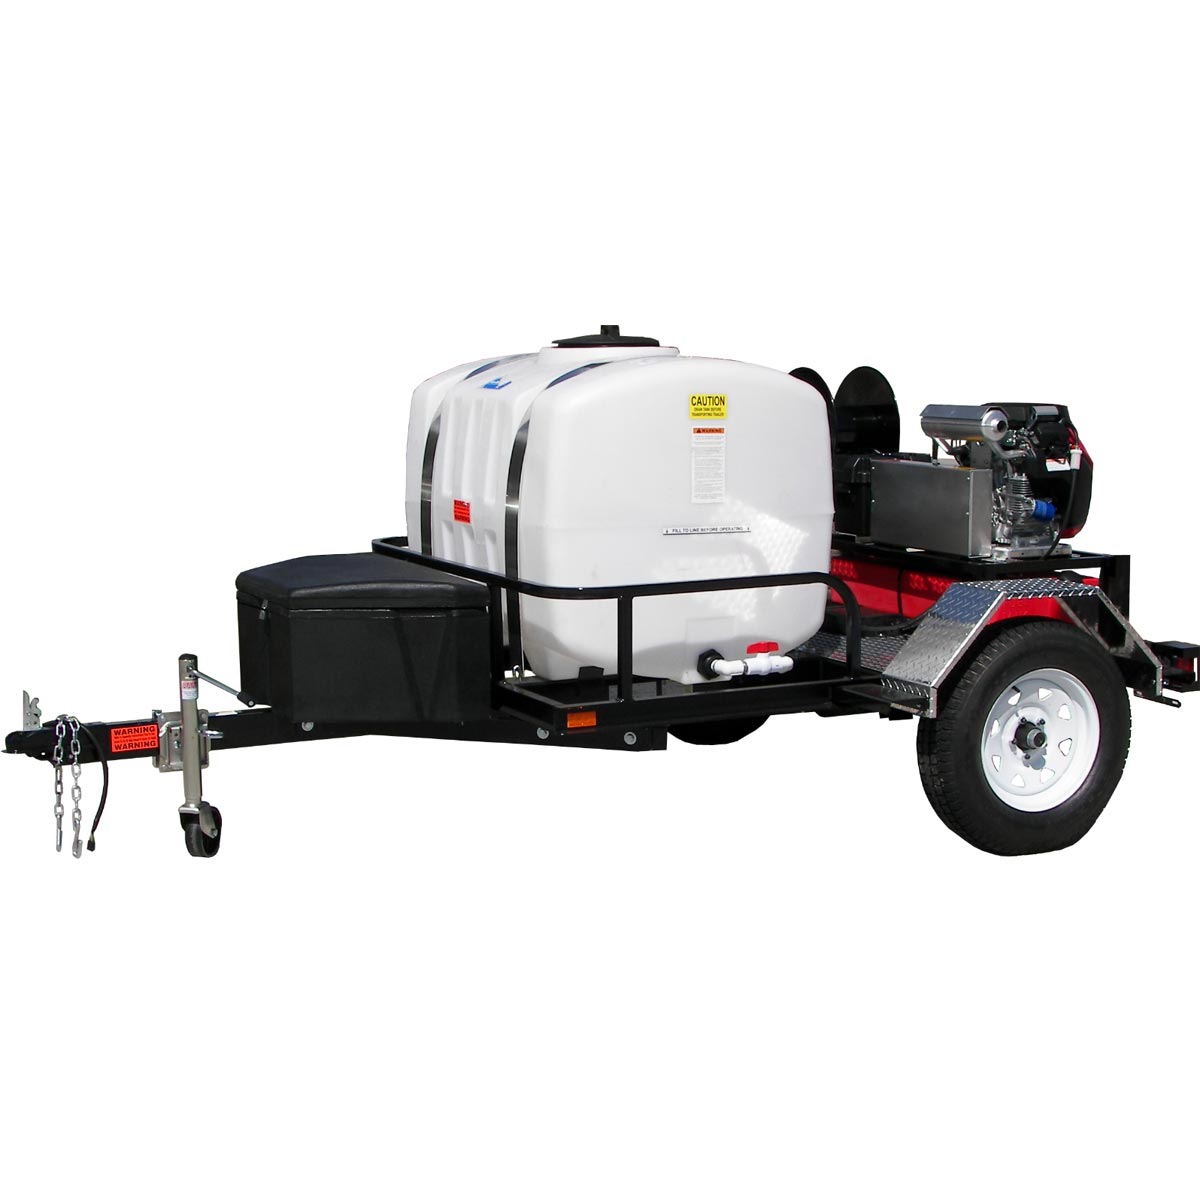 TRHDCV5535HG Pressure Pro GP Pressure Washer Tow-Pro Trailer Outfit 3500 PSI at 5.5 GPM Freight Included